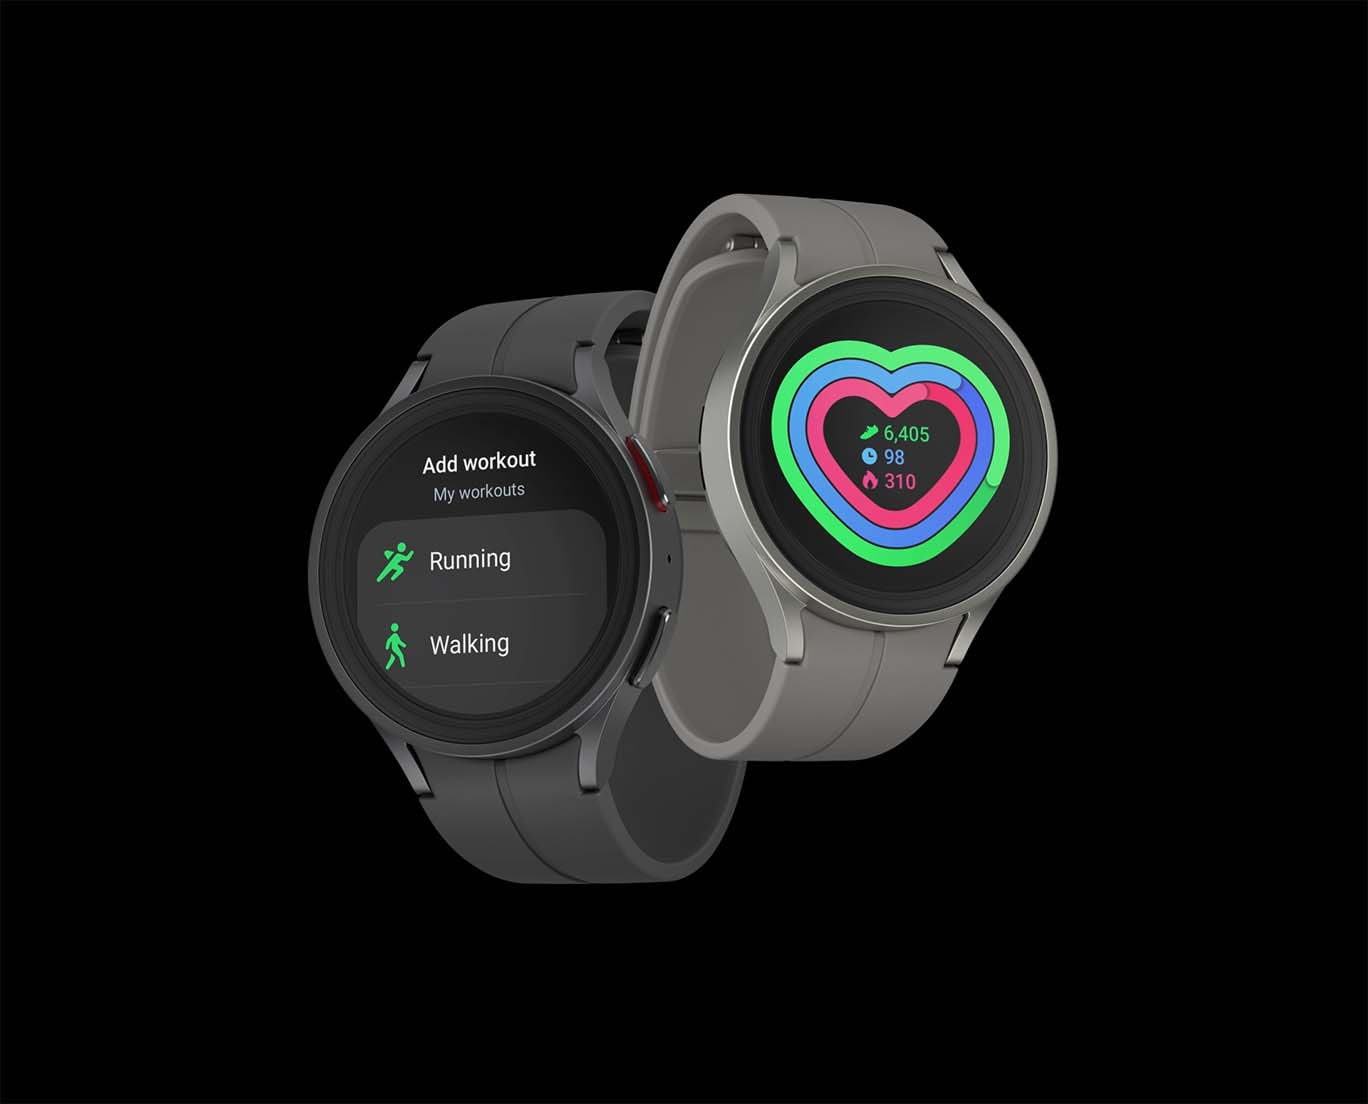 Two Galaxy Watch5 Pro watches intertwined with each other. The black Watch5 Pro on the left displays the “Exercise” interface on the watch face, while the gray Watch5 Pro on the right displays the heart rate screen on the watch face.